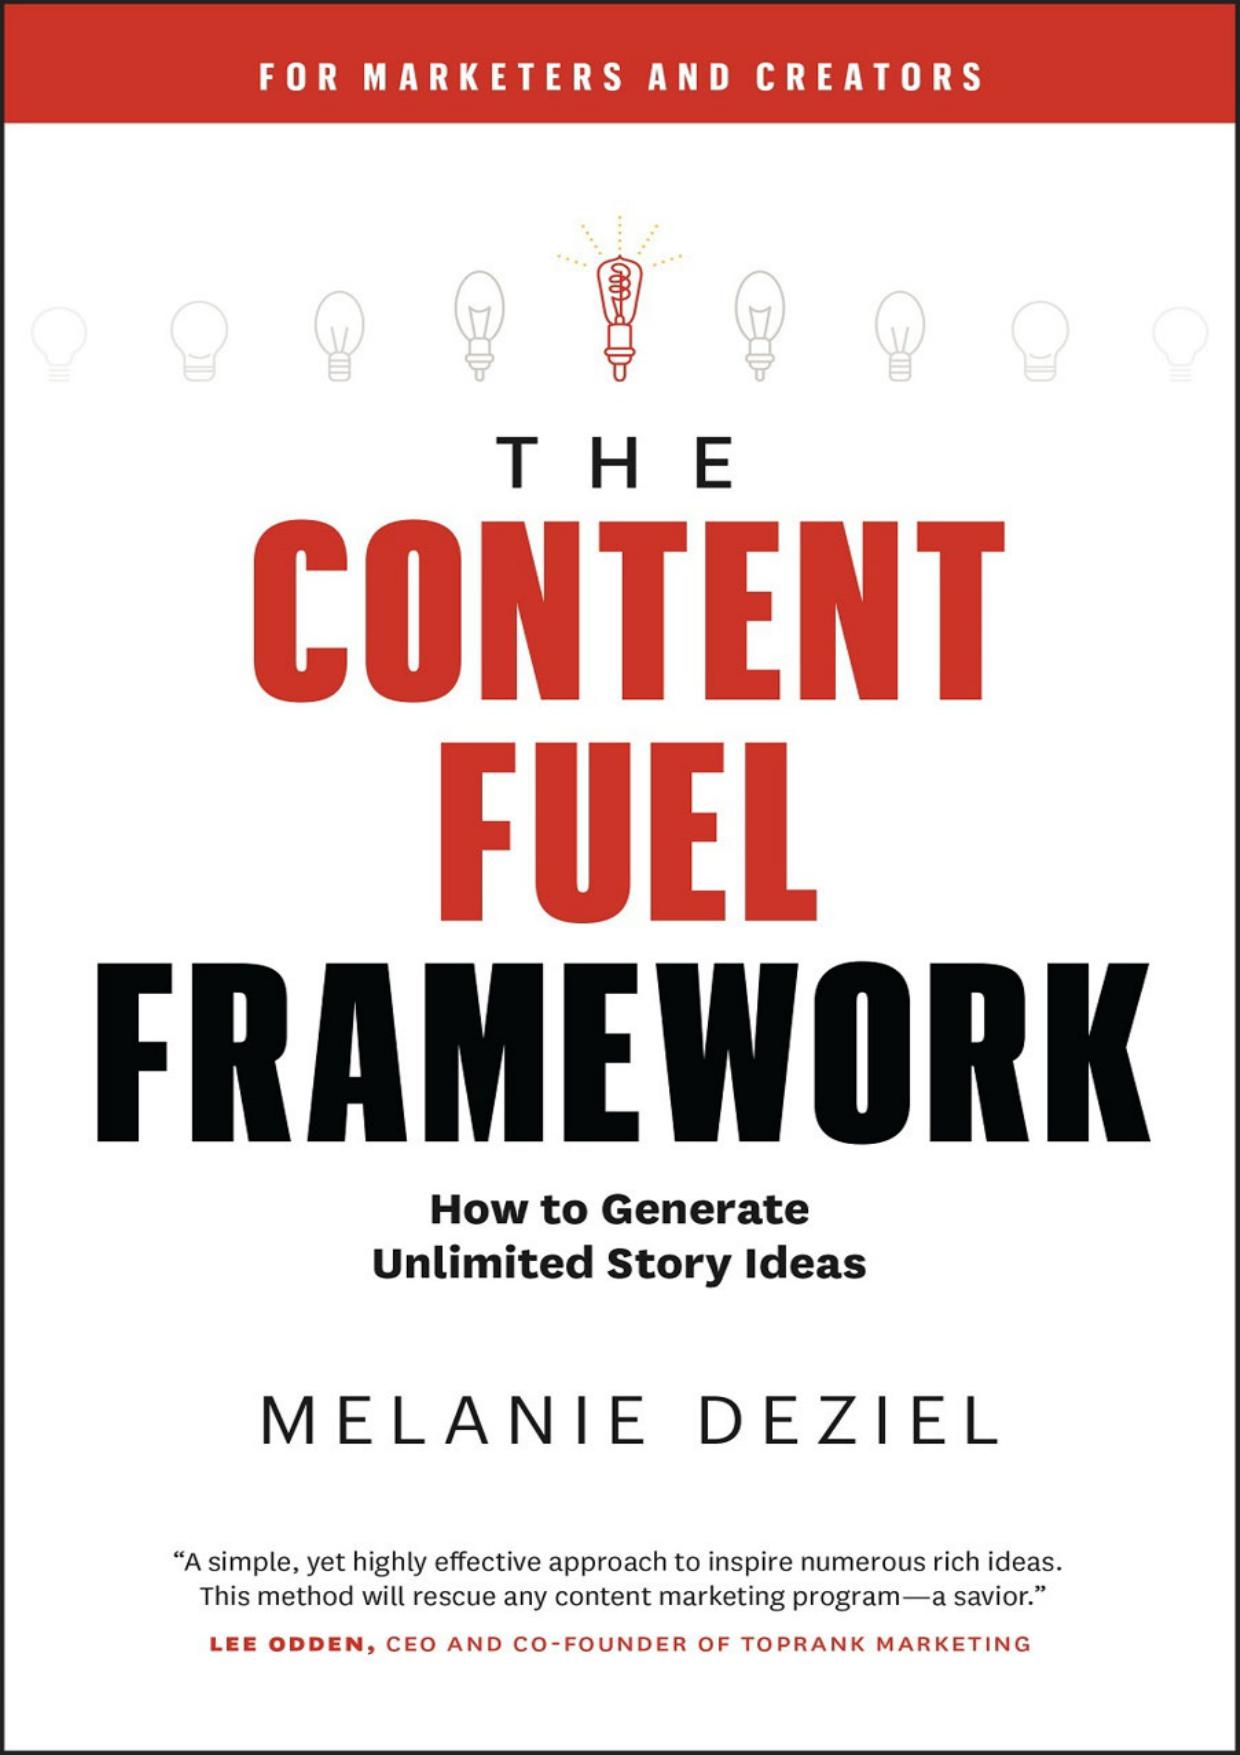 The Content Fuel Framework: How to Generate Unlimited Story Ideas by Melanie Deziel